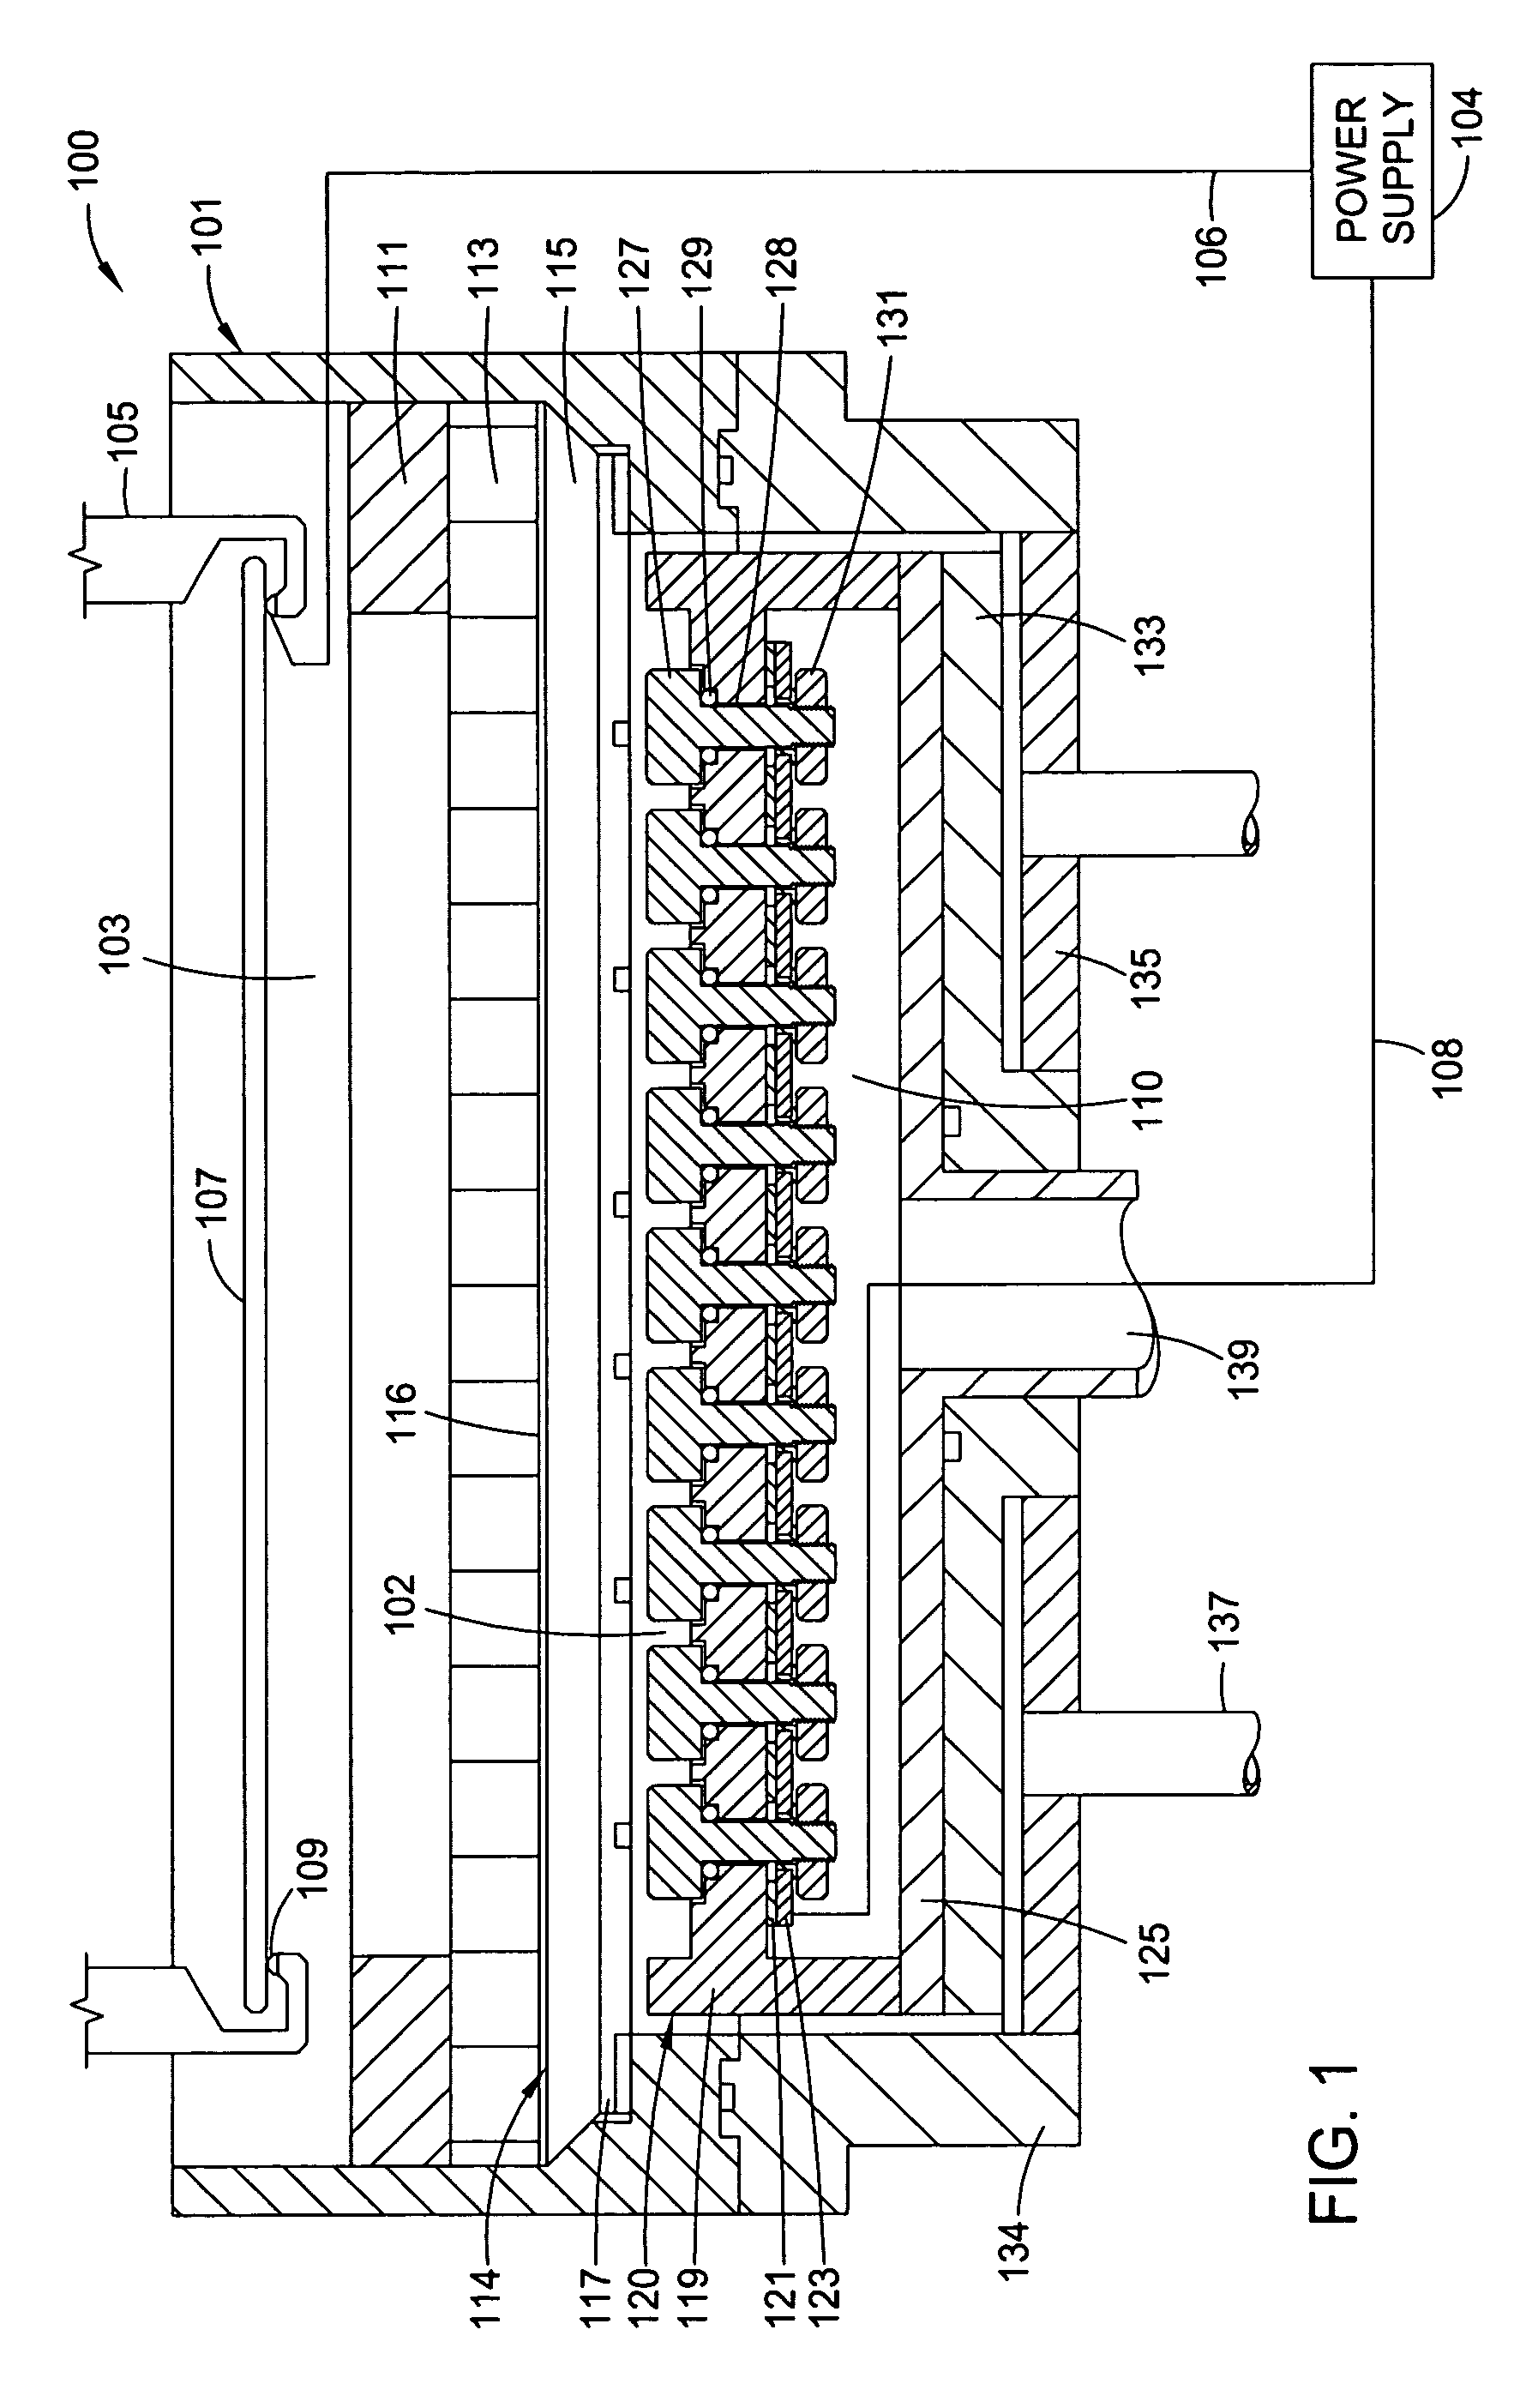 Electroplating apparatus and method based on an array of anodes